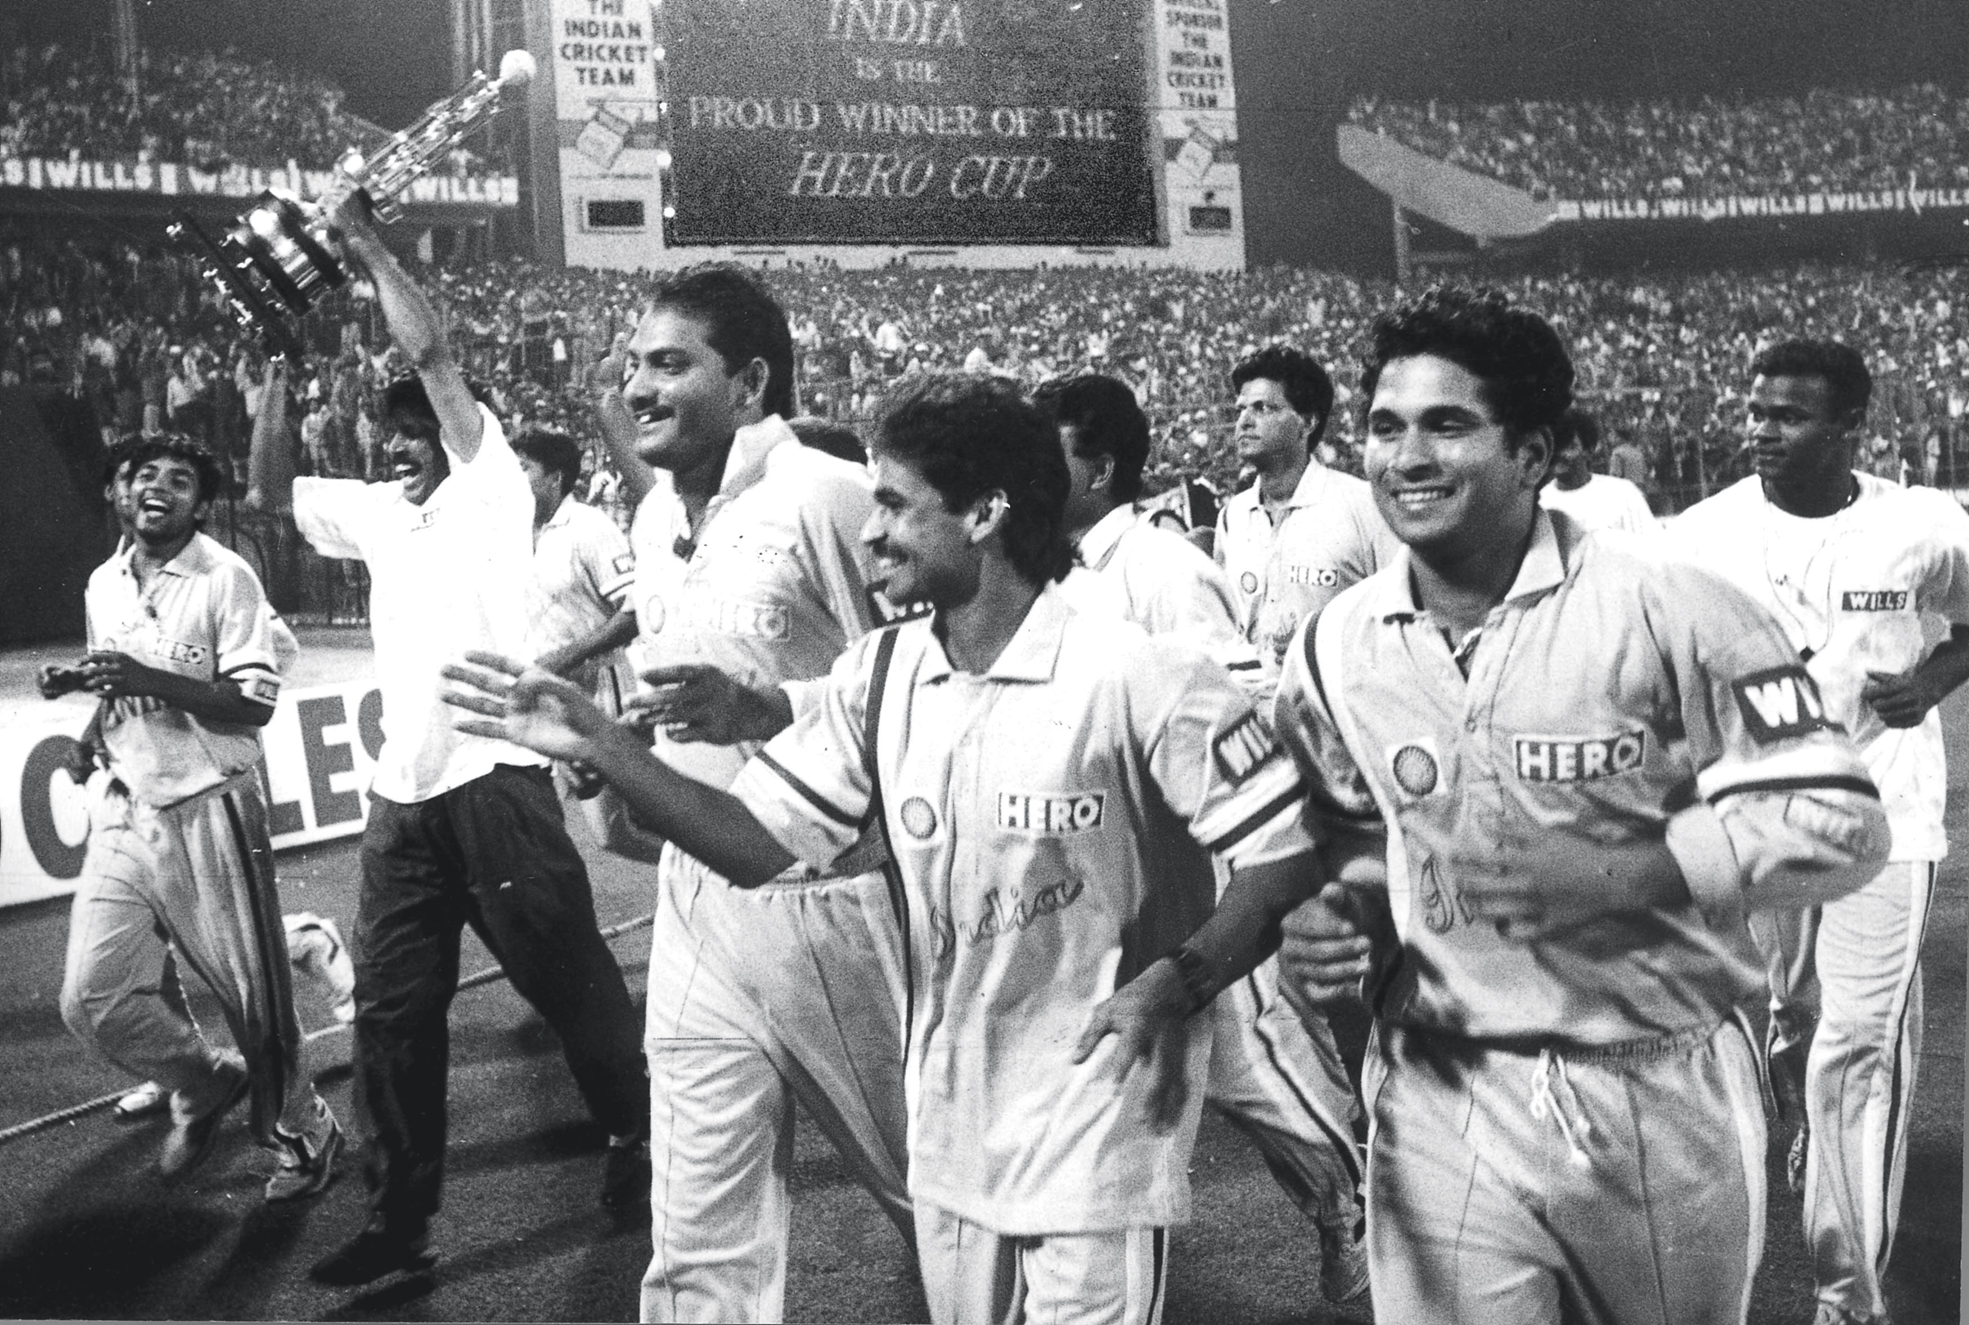 The Indian team after winning the Hero Cup final.